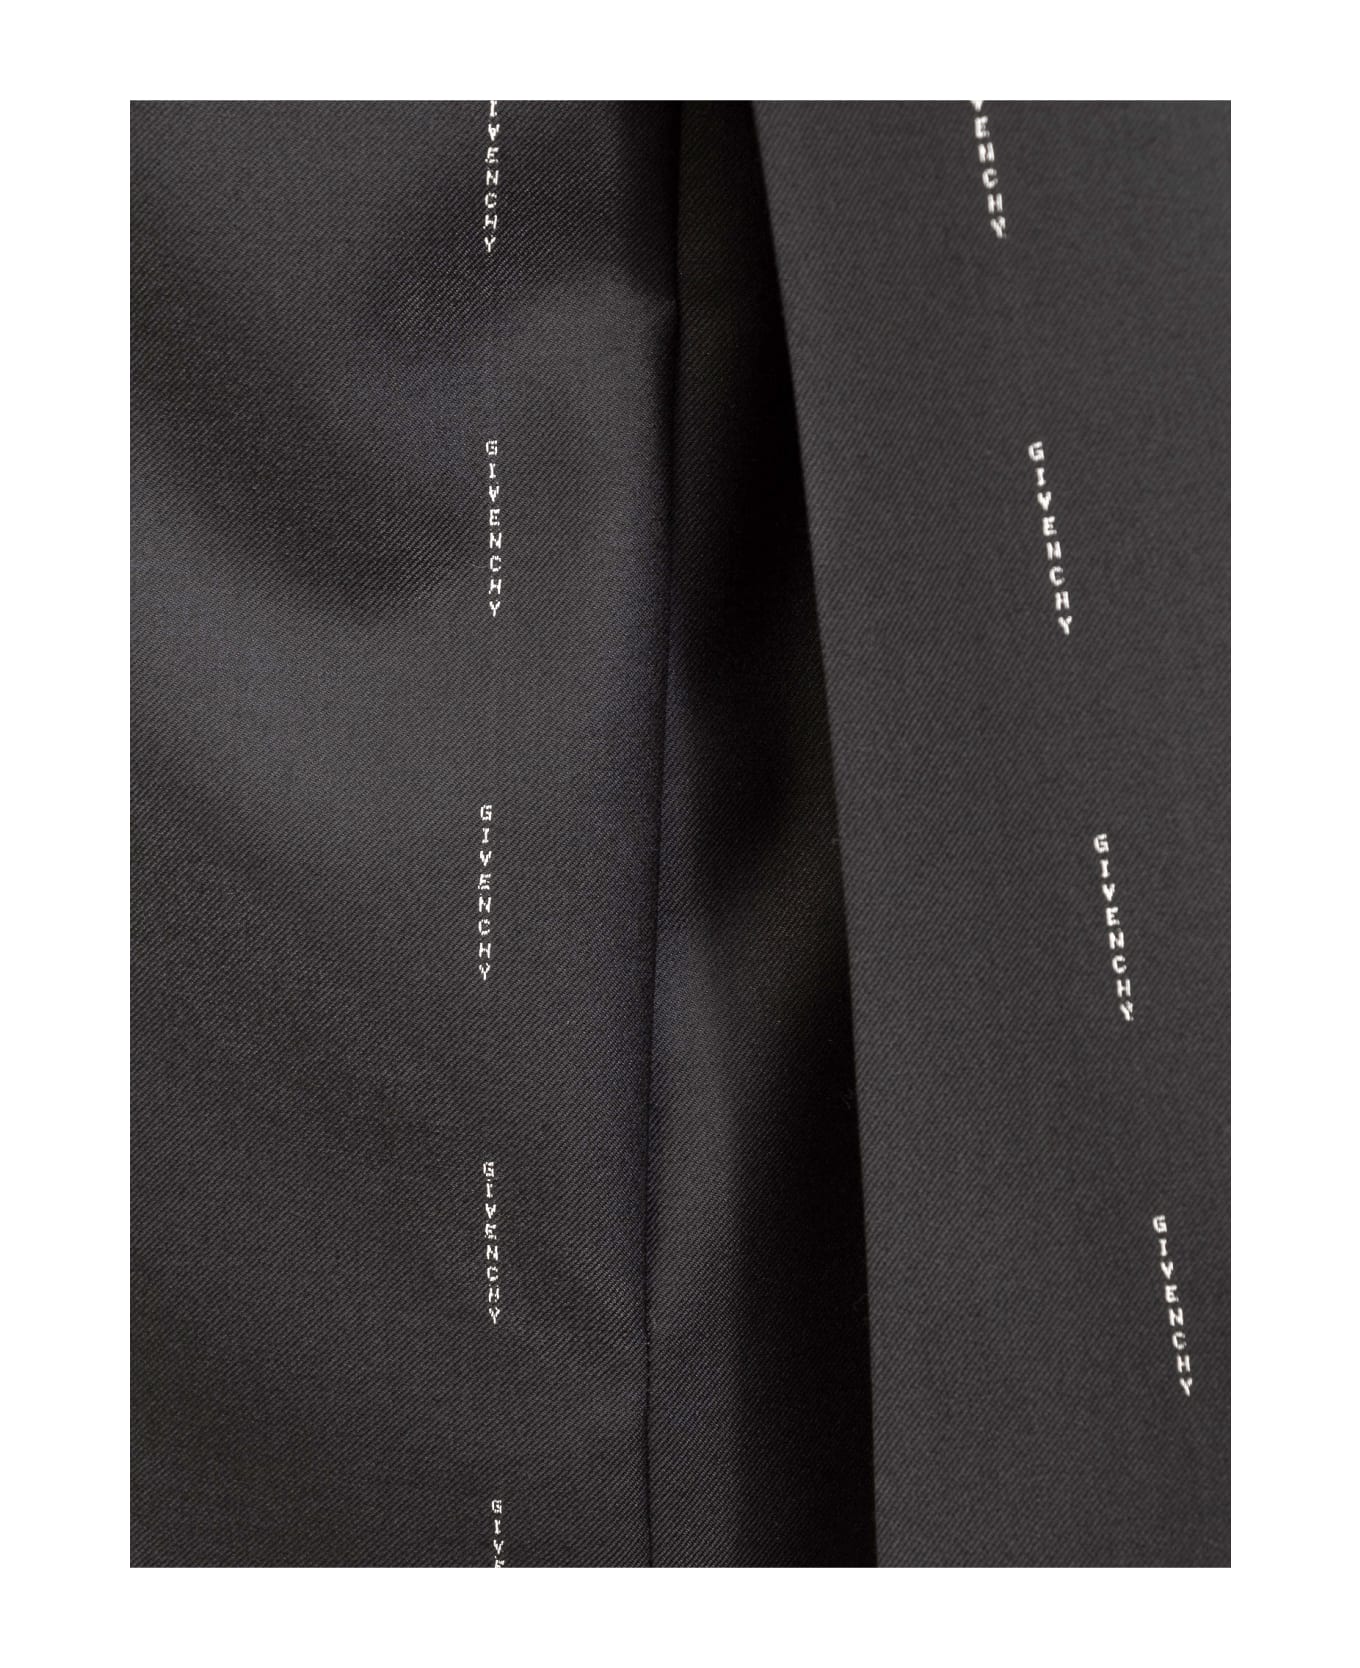 Givenchy Embroidered Twill Blazer - black